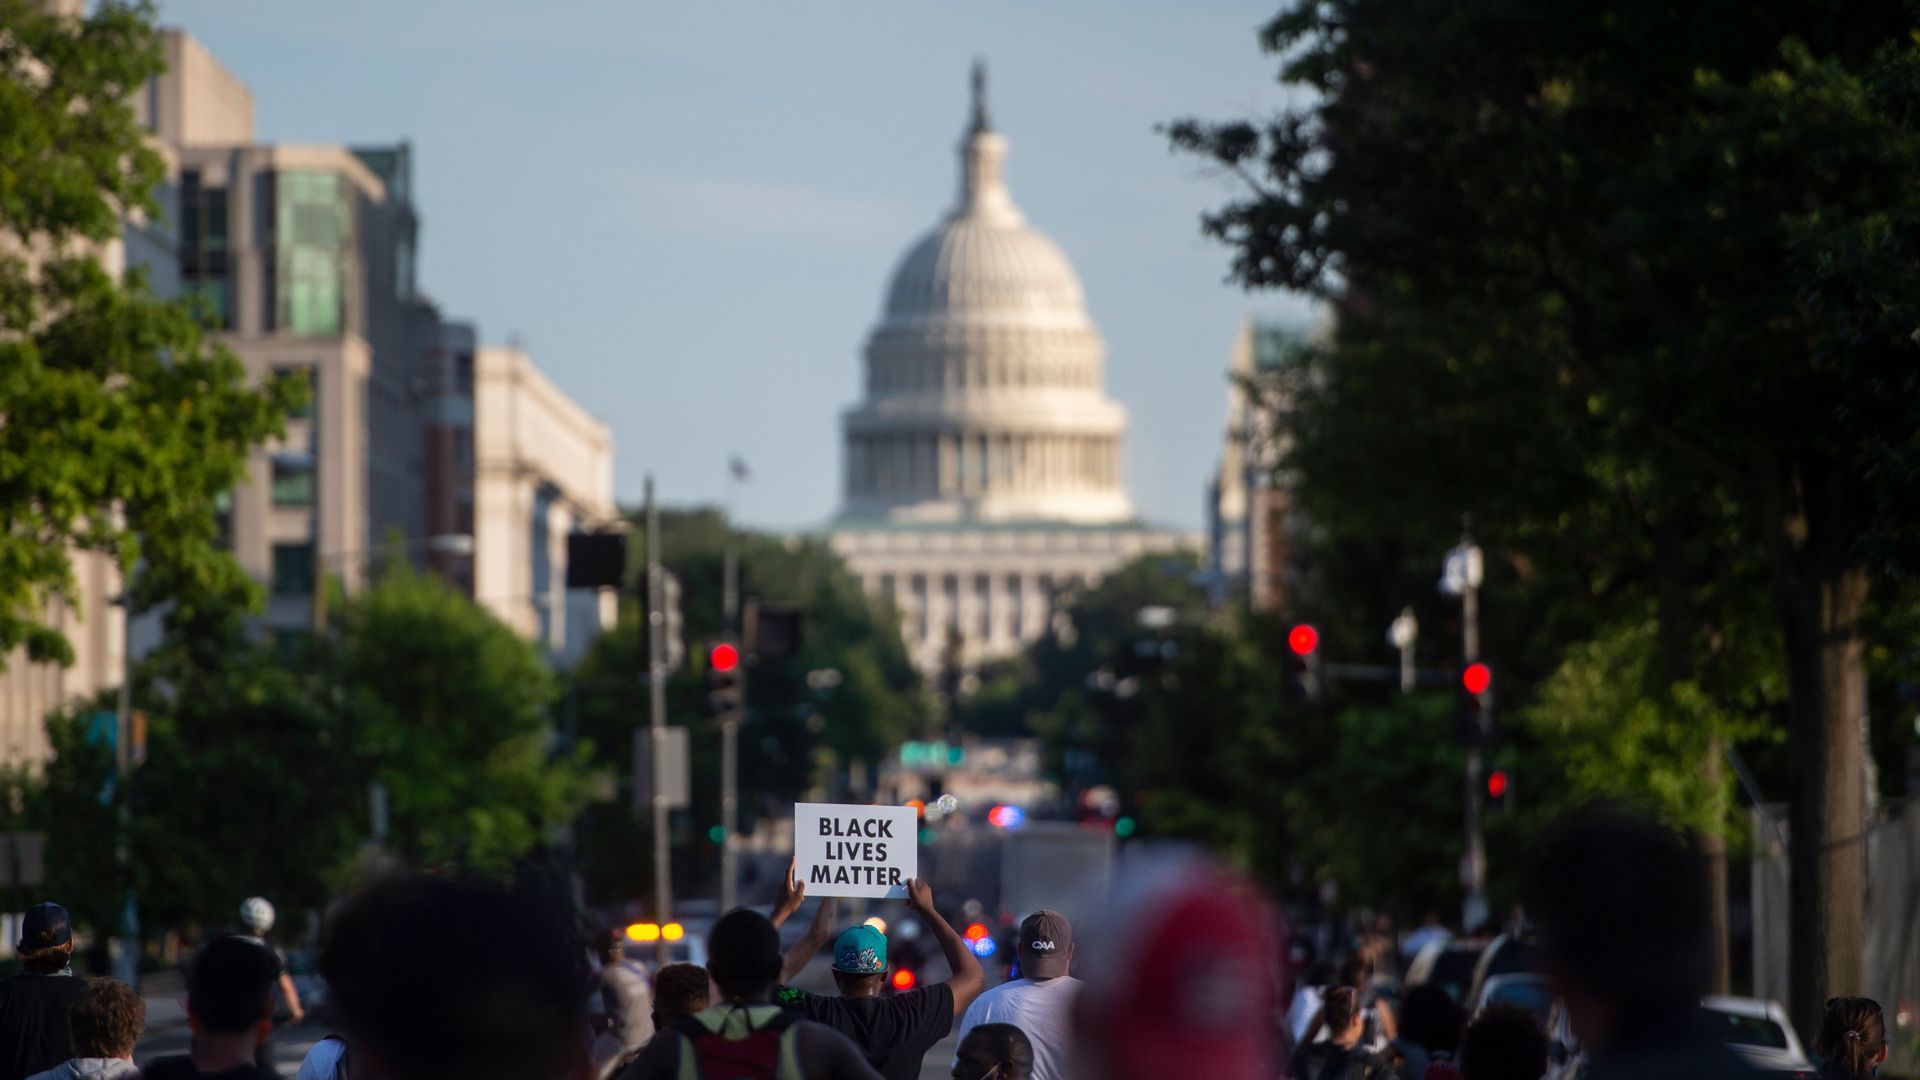  Black Lives Matter protesters march through the streets near the US Capitol in Washington, DC on June 24